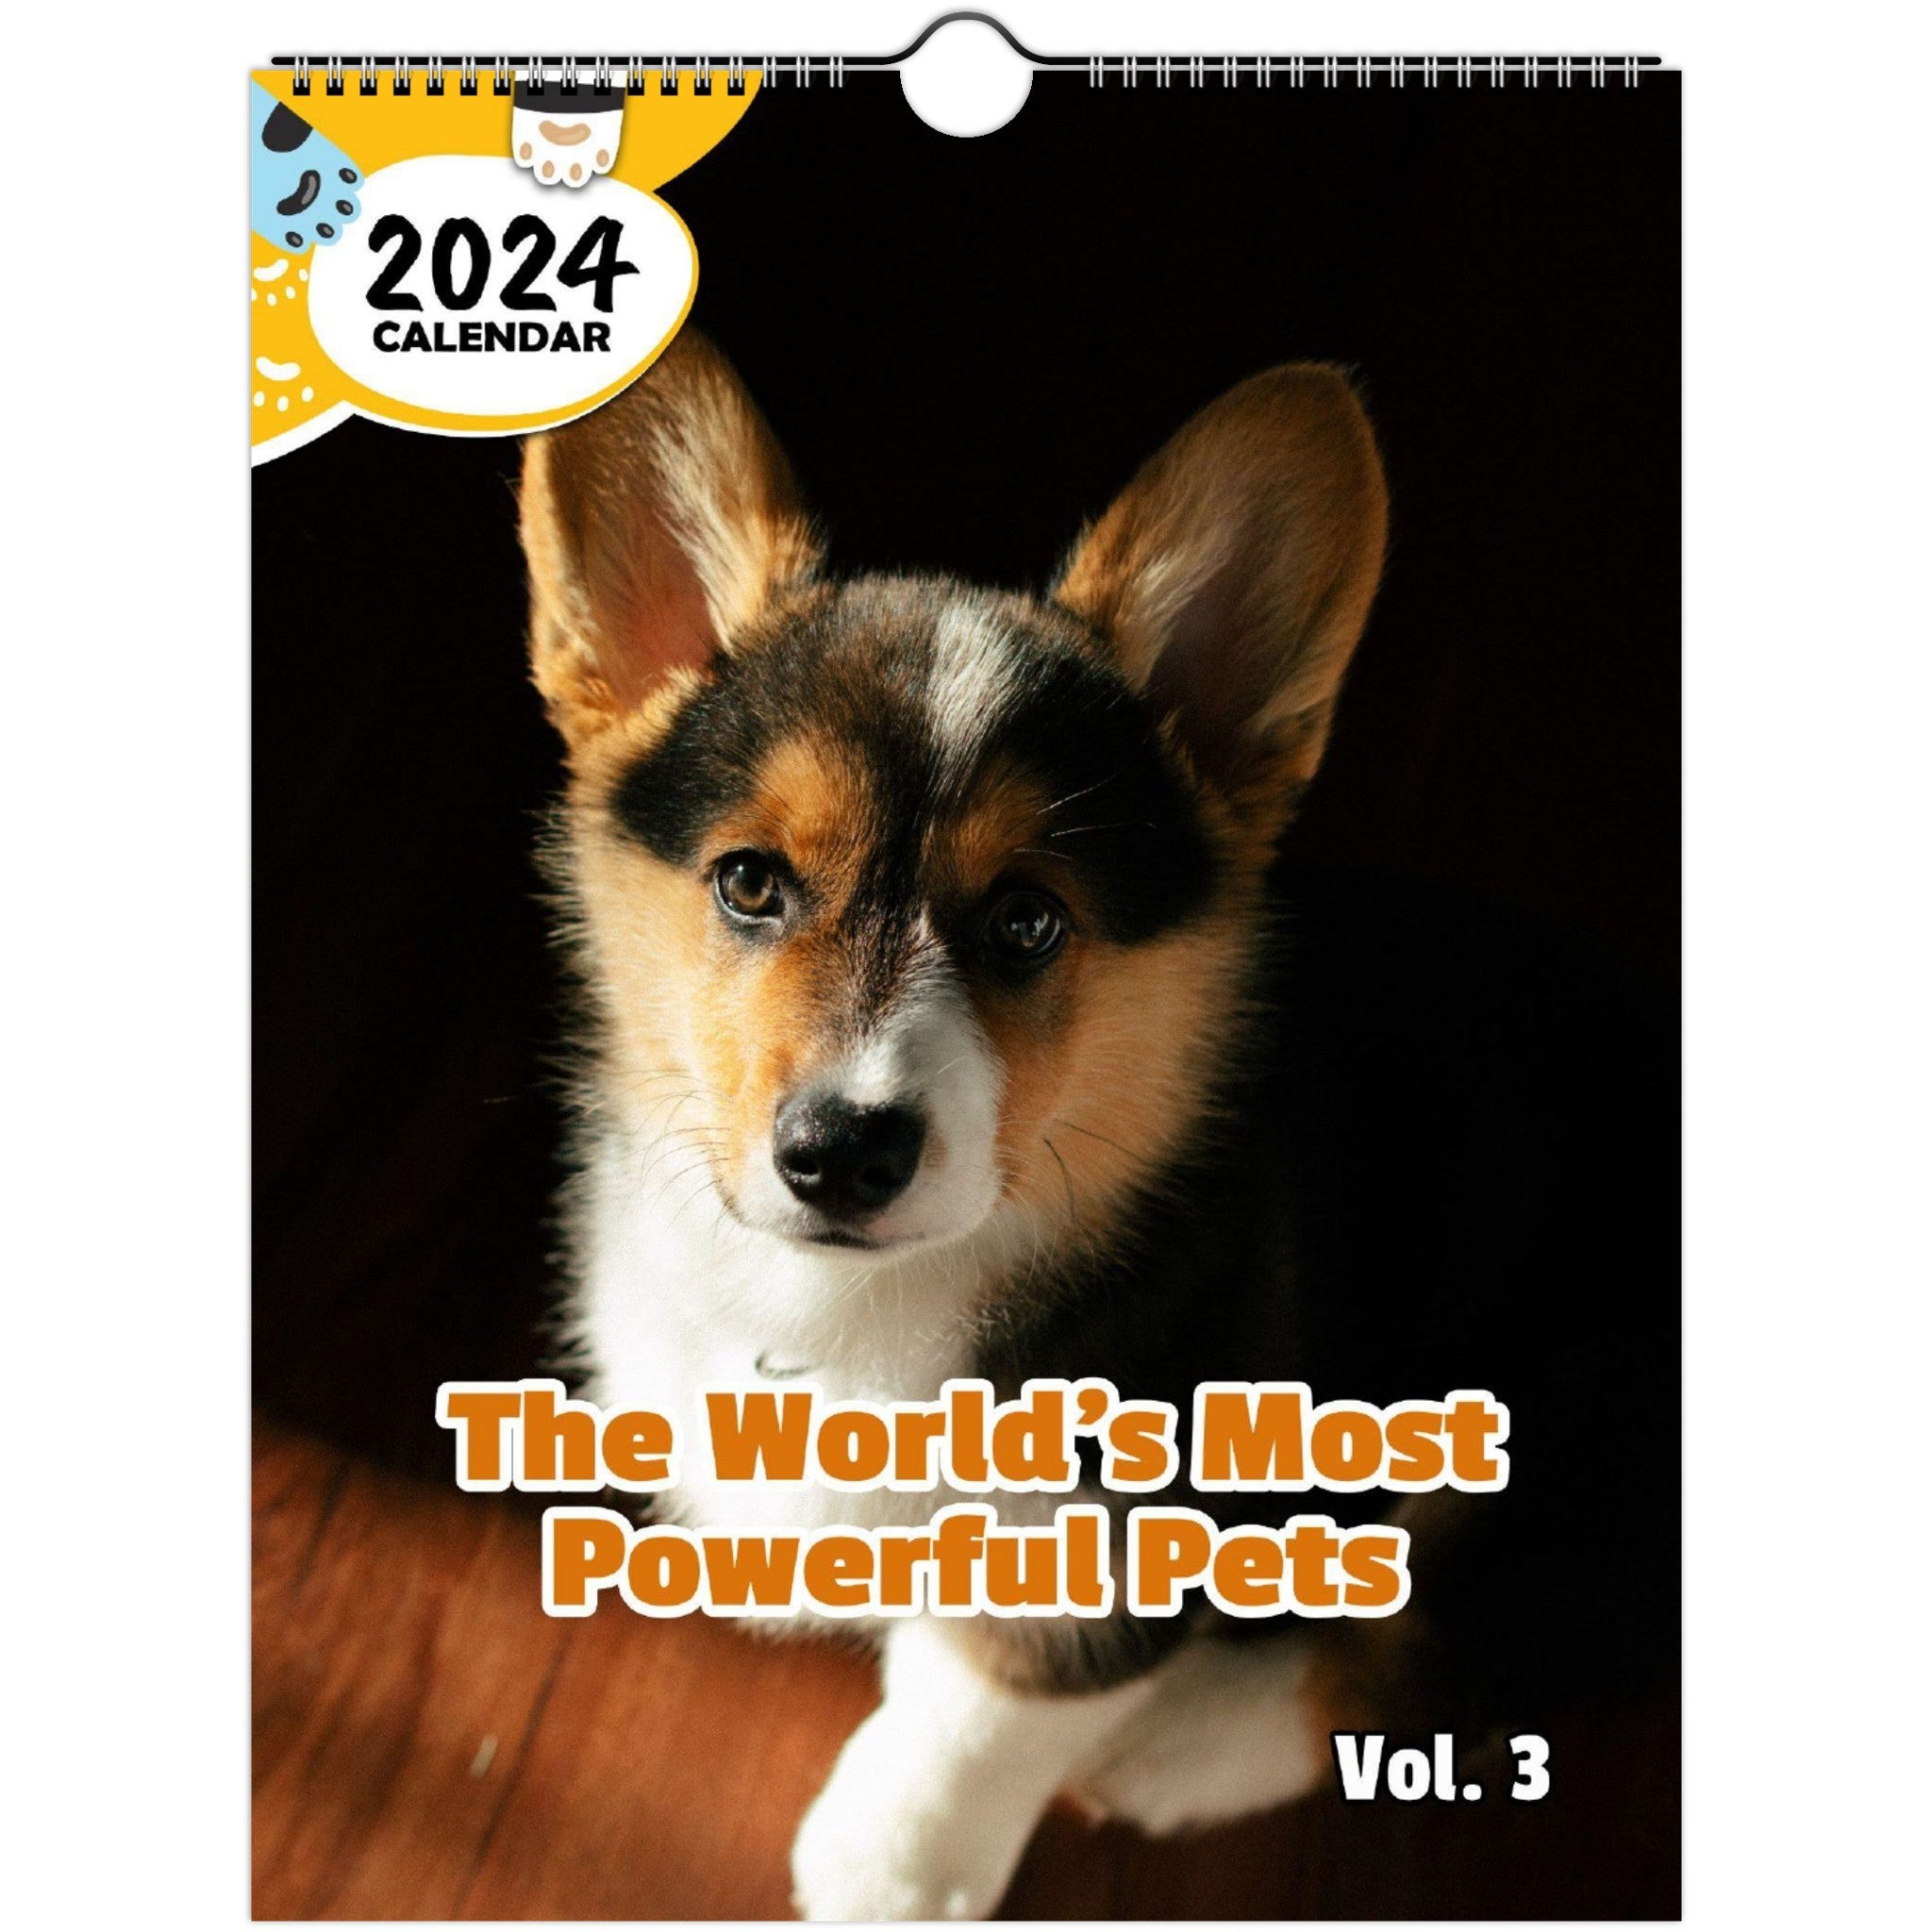 The World's Most Powerful Pets Volume Three: 2024 Wall Calendar (Published)